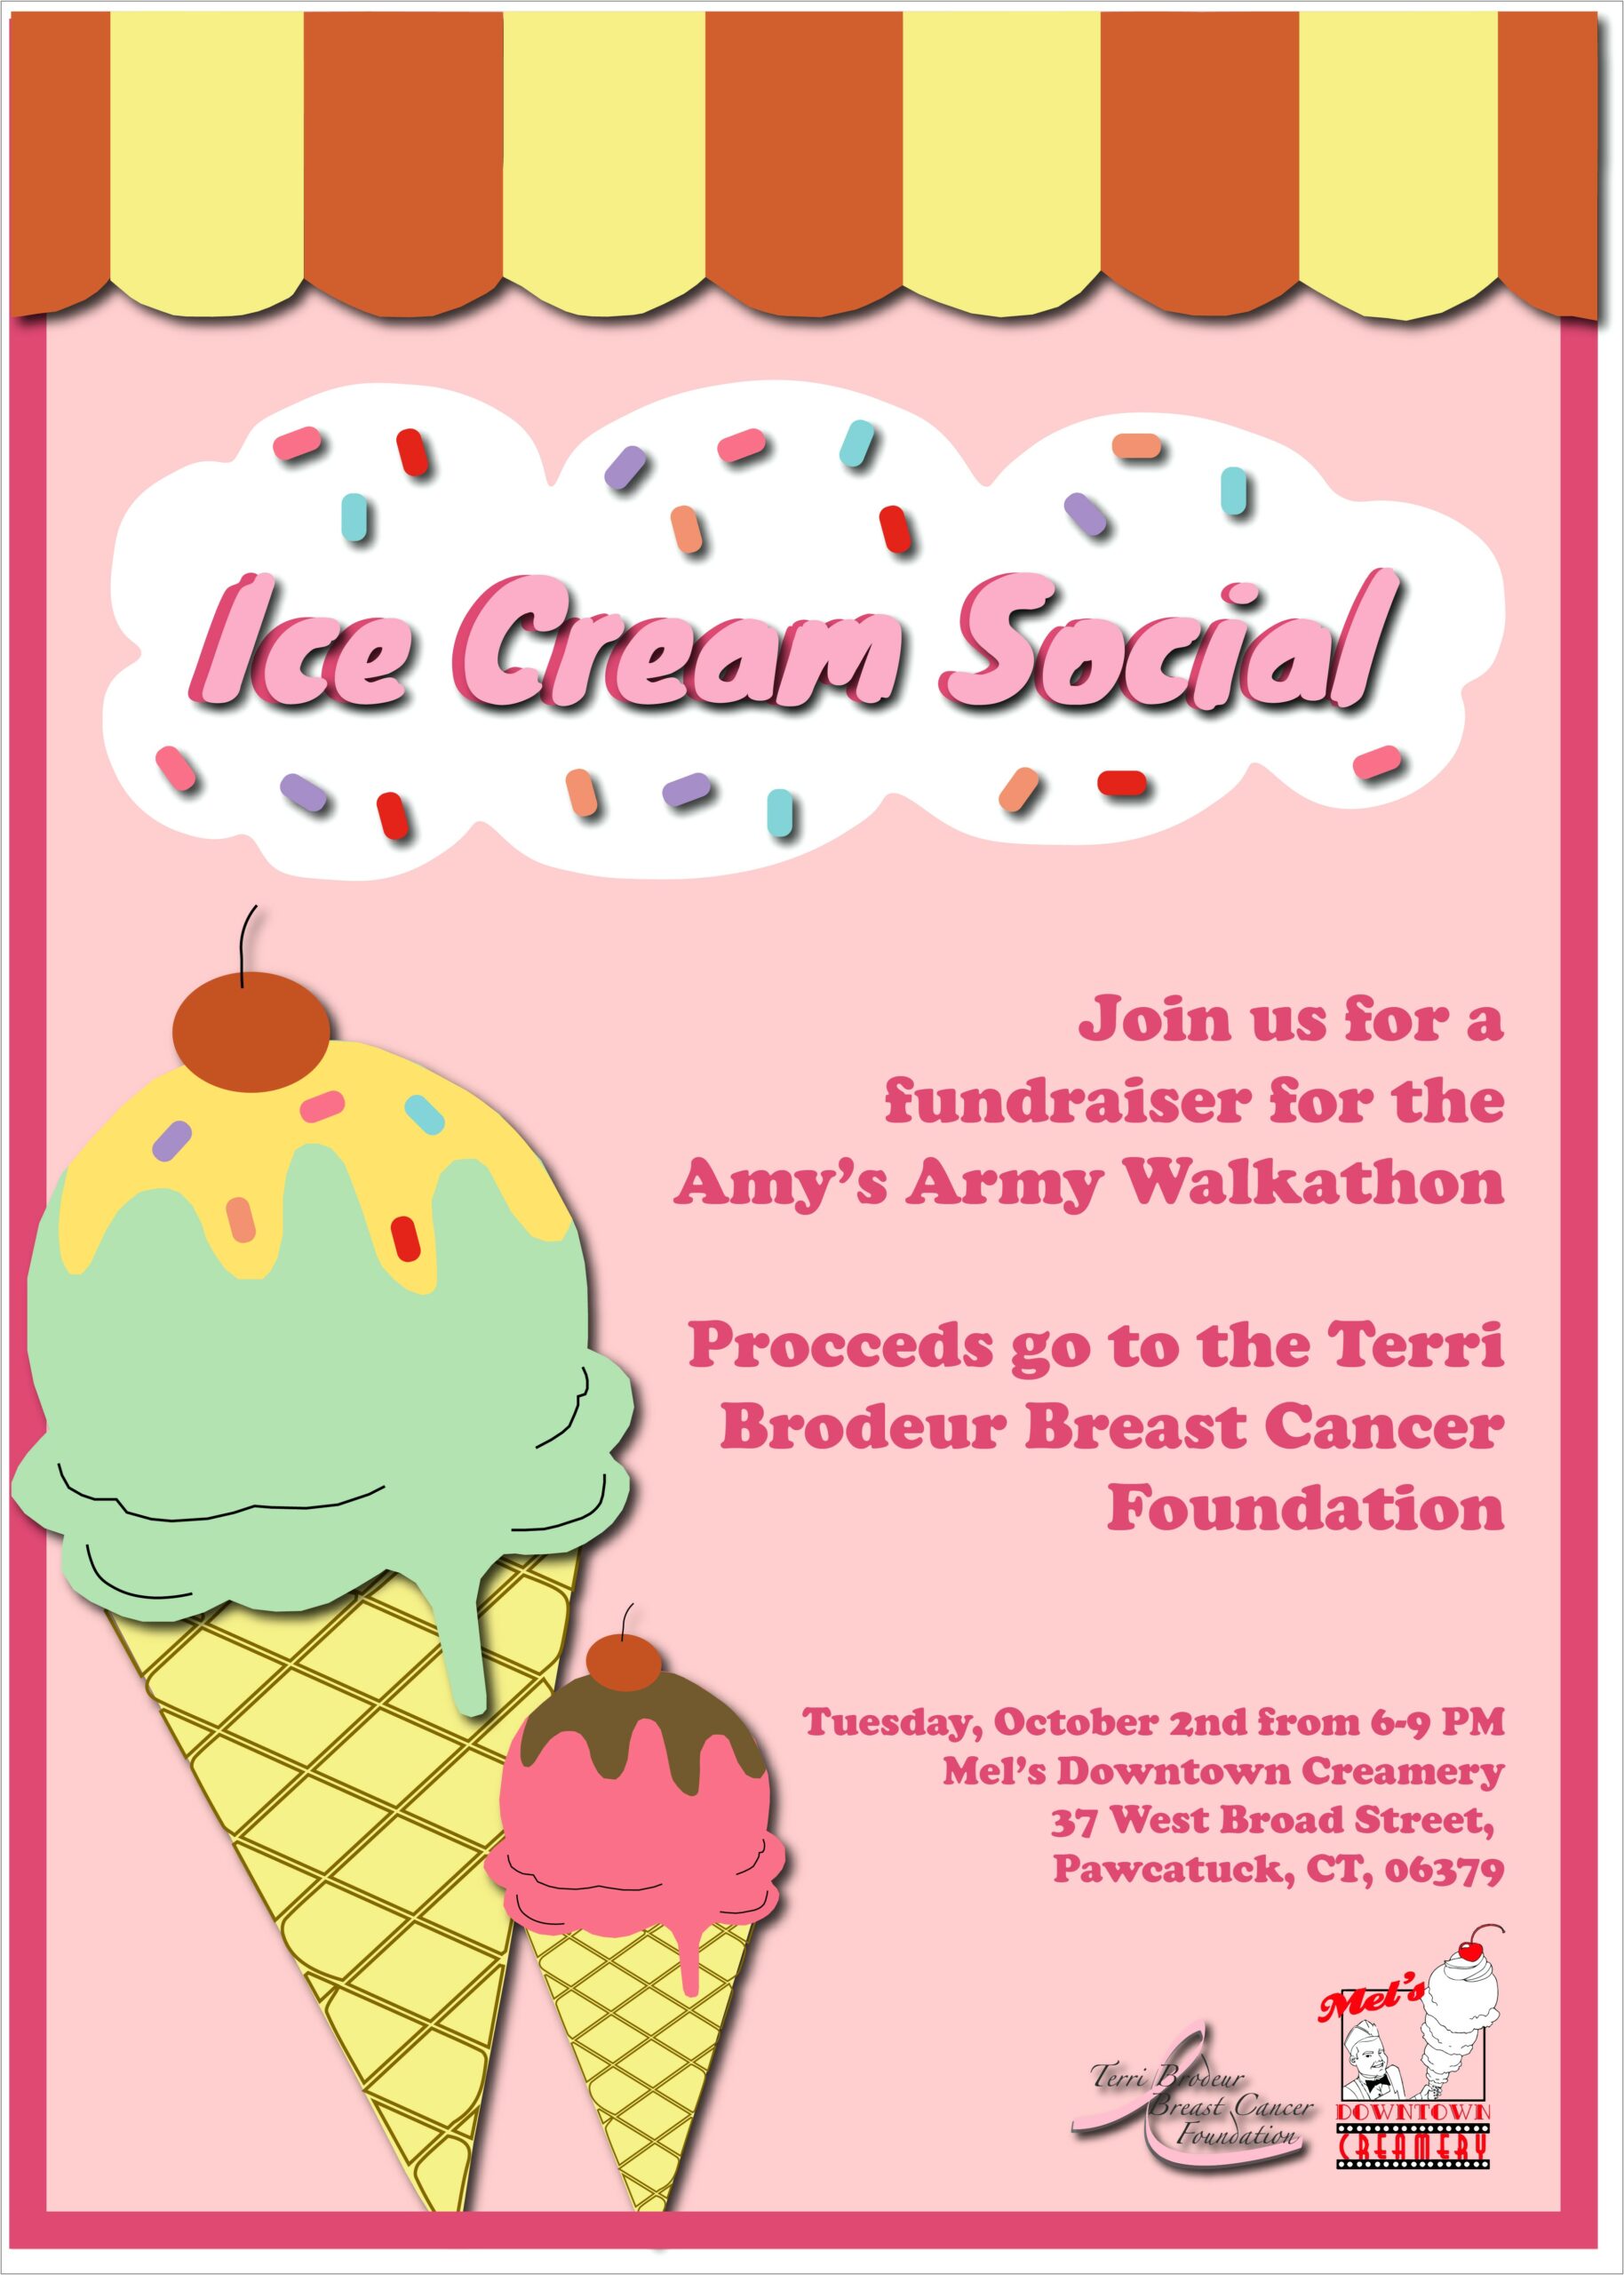 Ice Cream Social Event Flyer Template Free